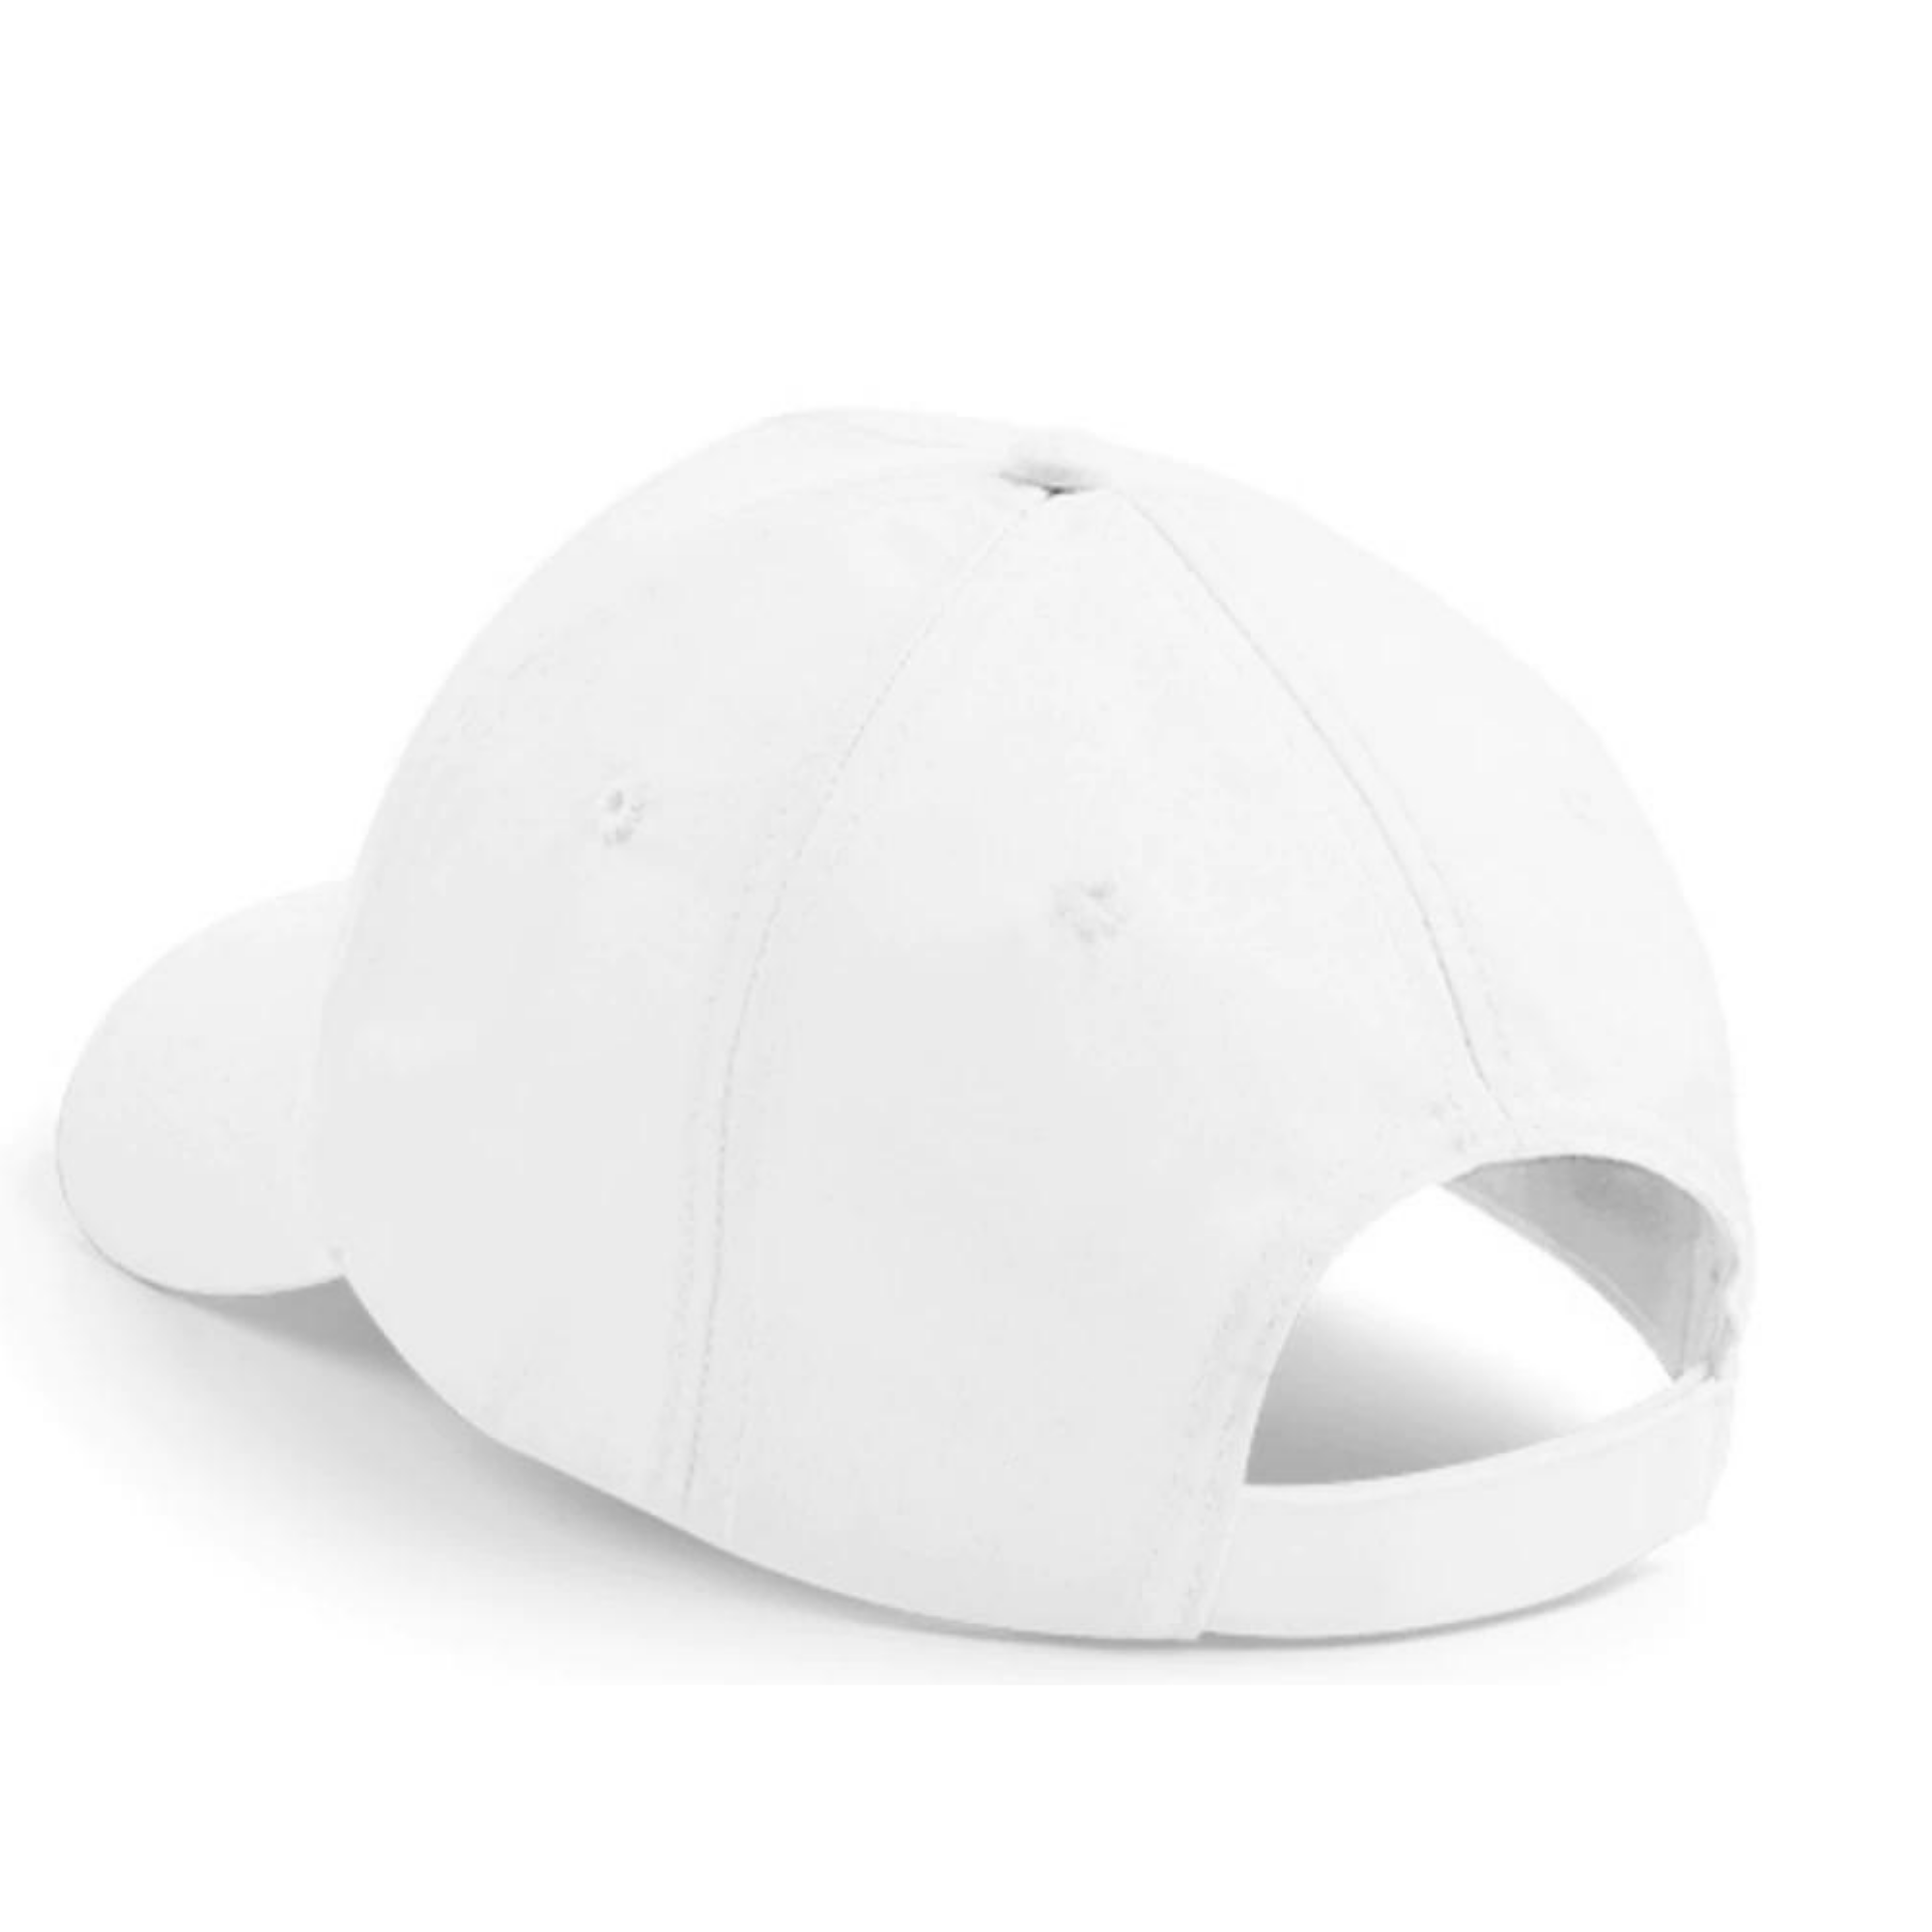 Heavy Brushed Cotton Cap 5 Panels With Velcro(Self-Strap)